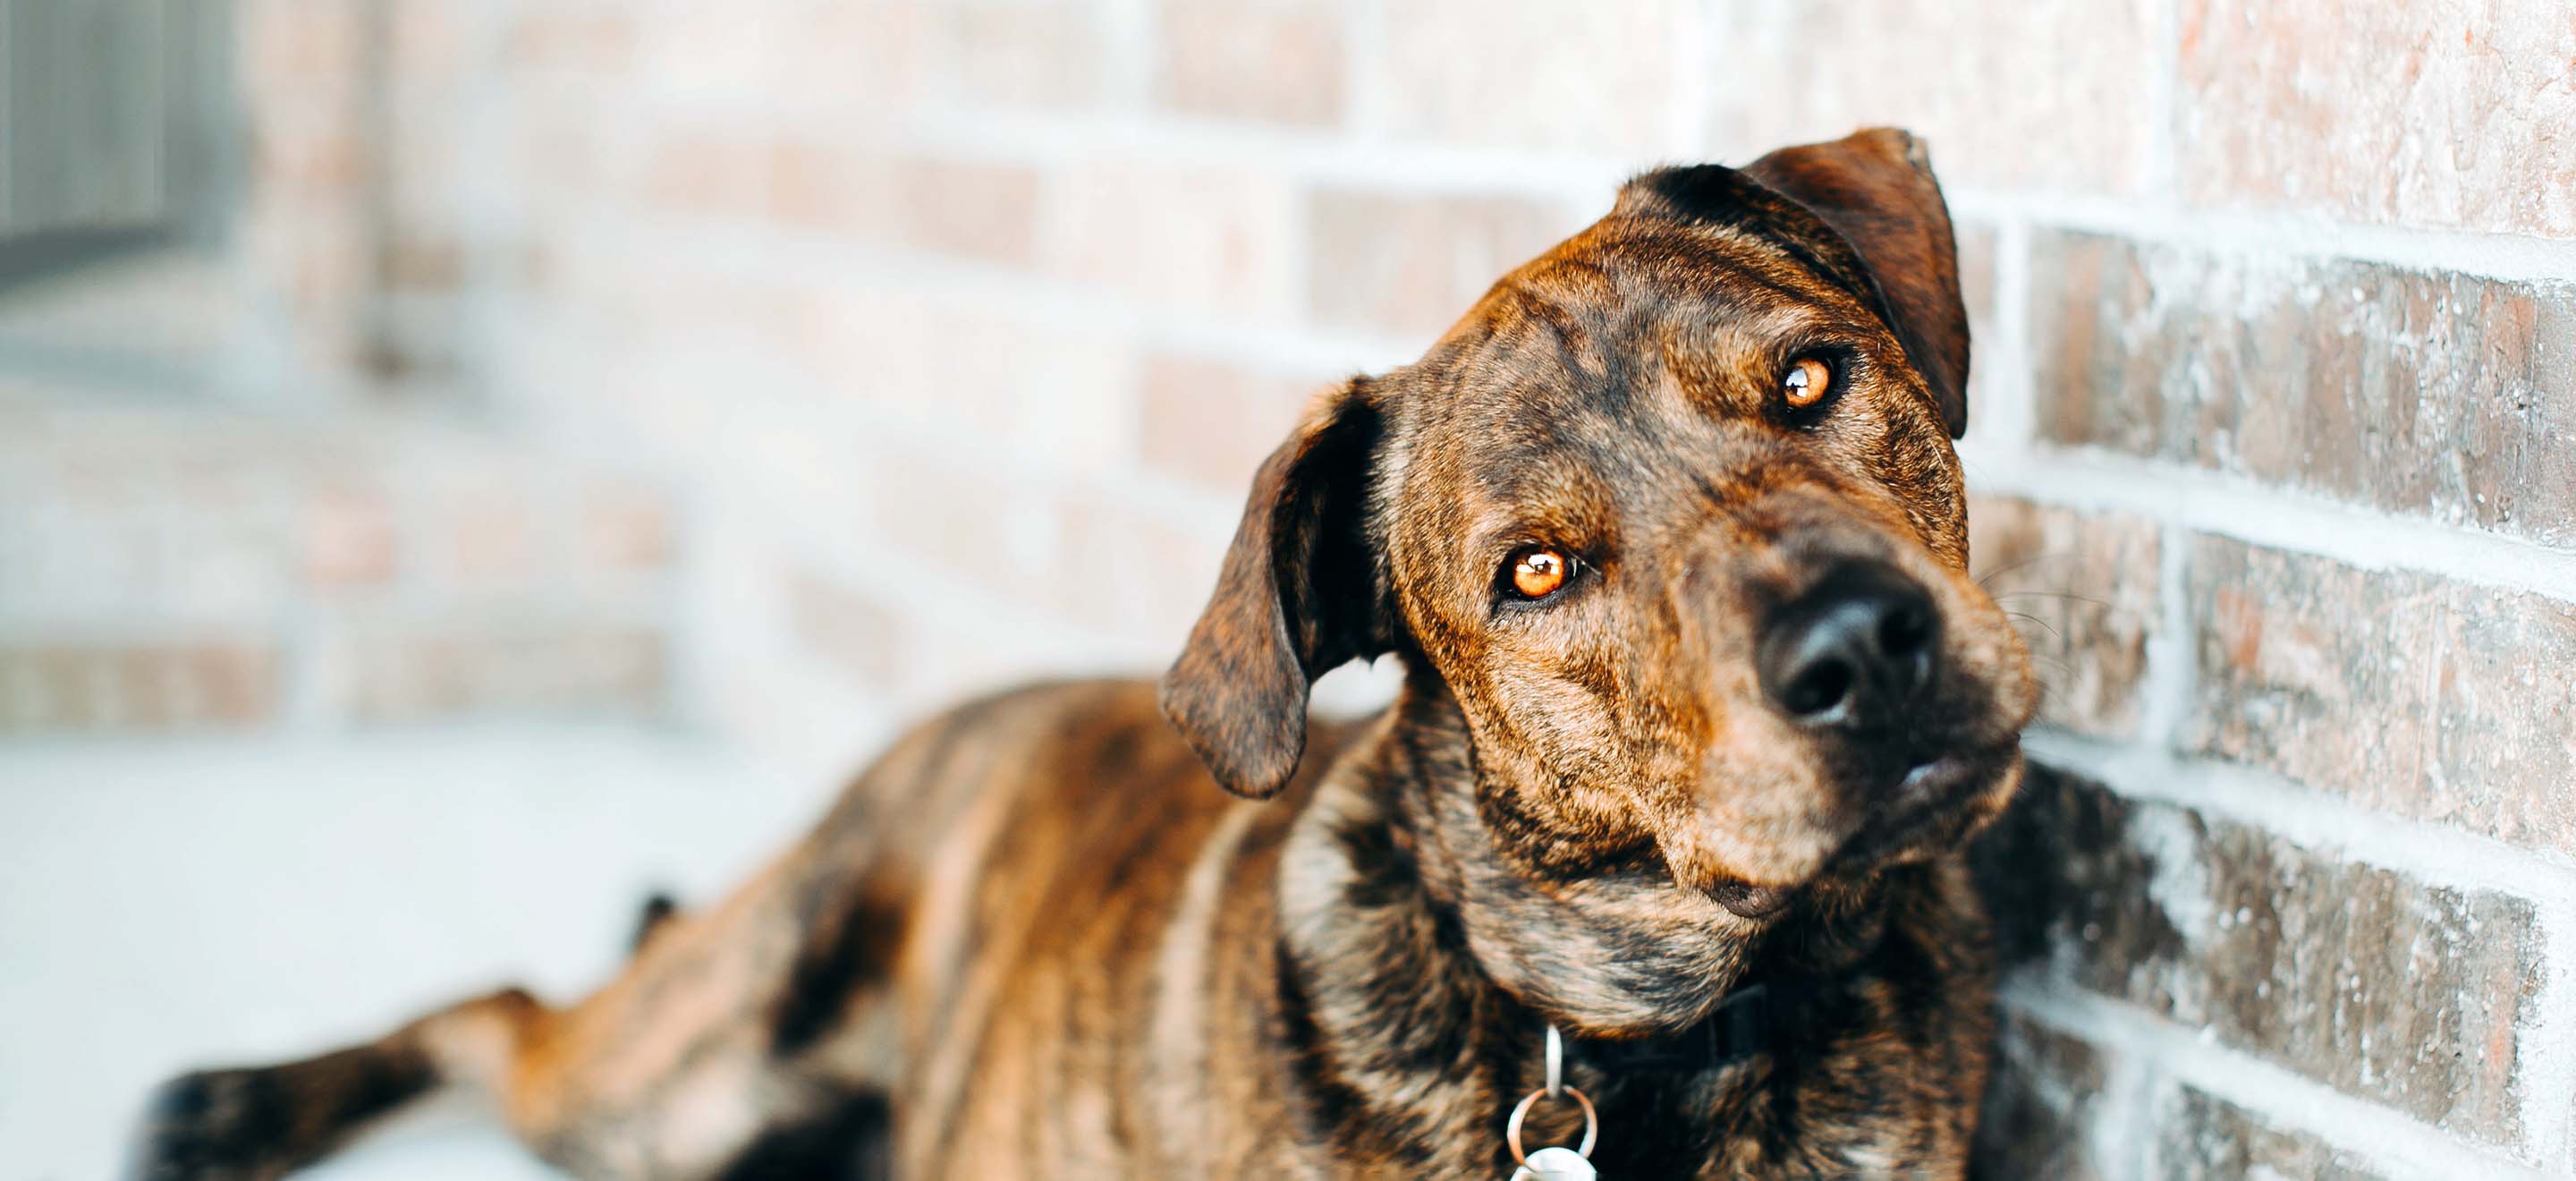 Brindle coat Mountain Cur dog sitting against a brick wall image